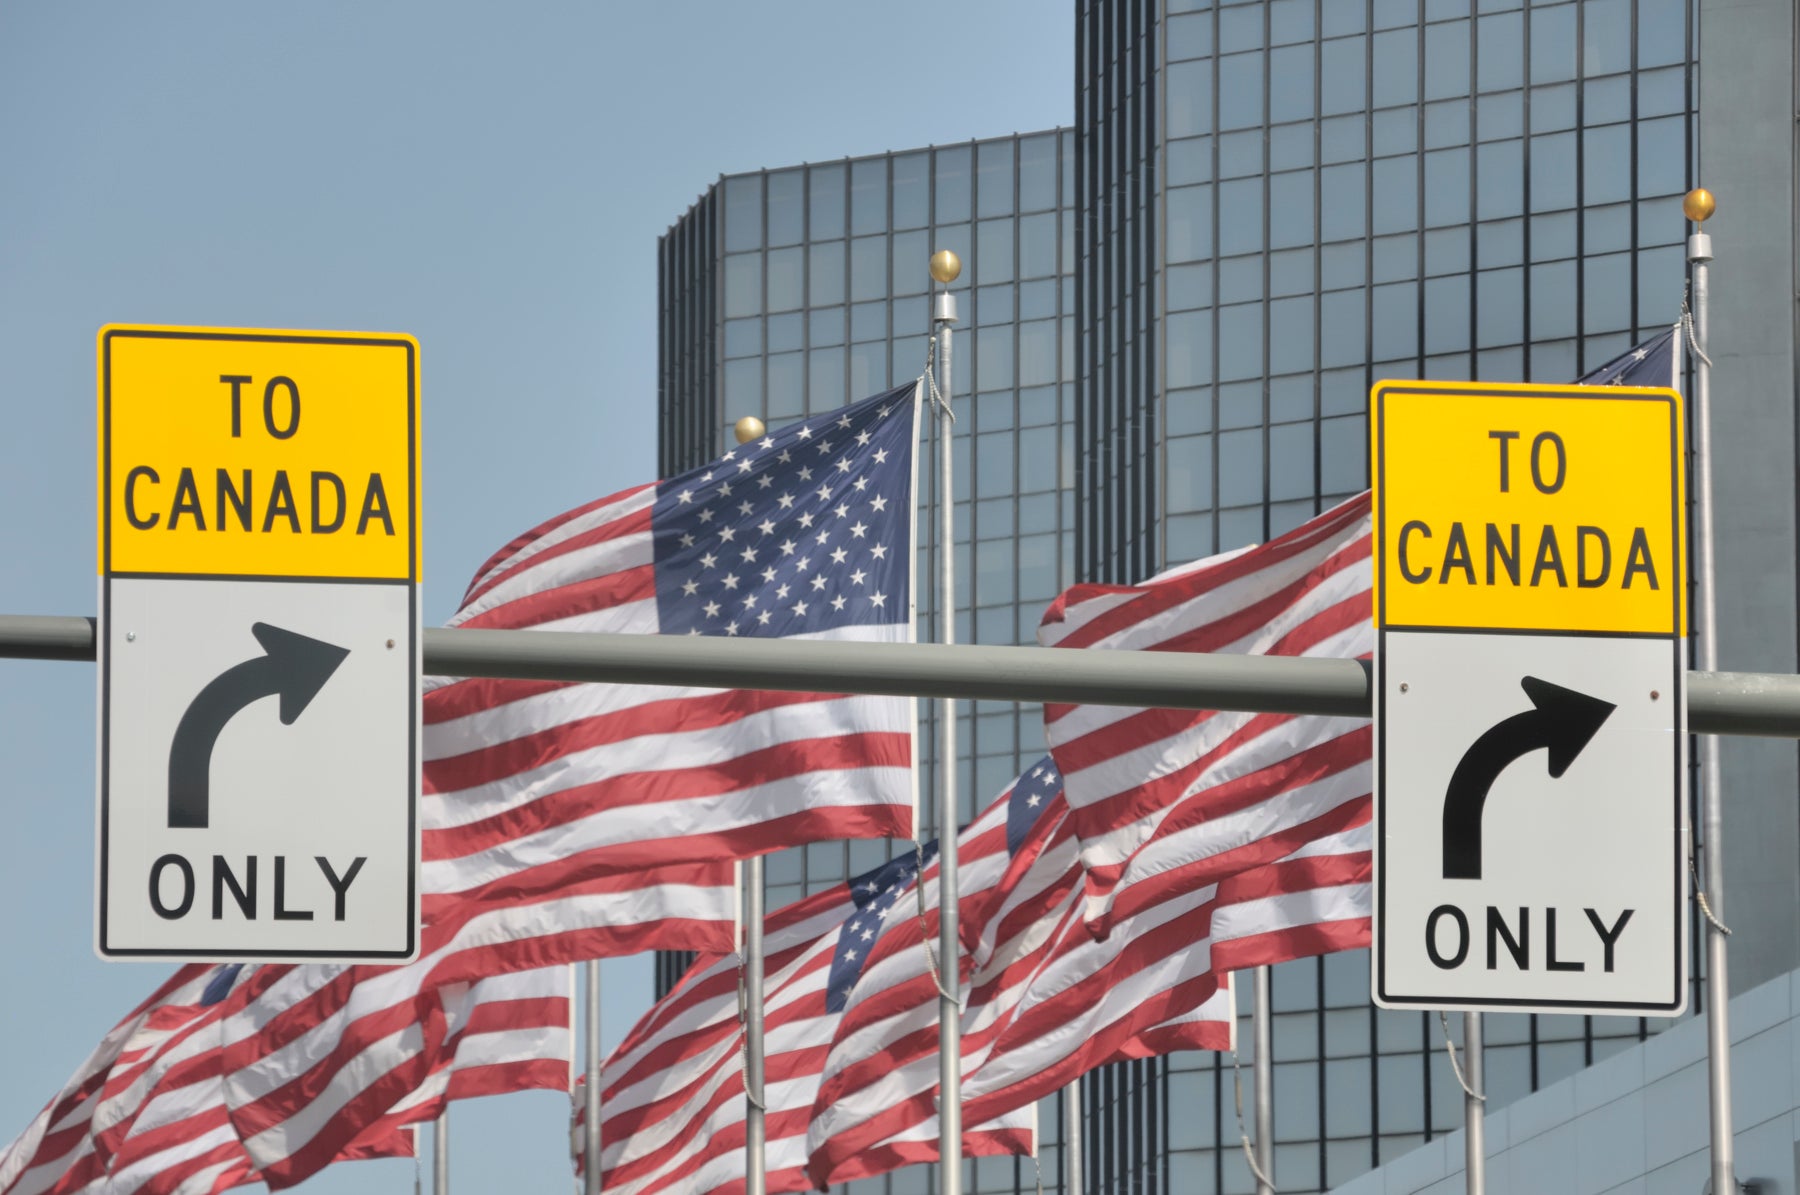 American flags behind to Canada signs